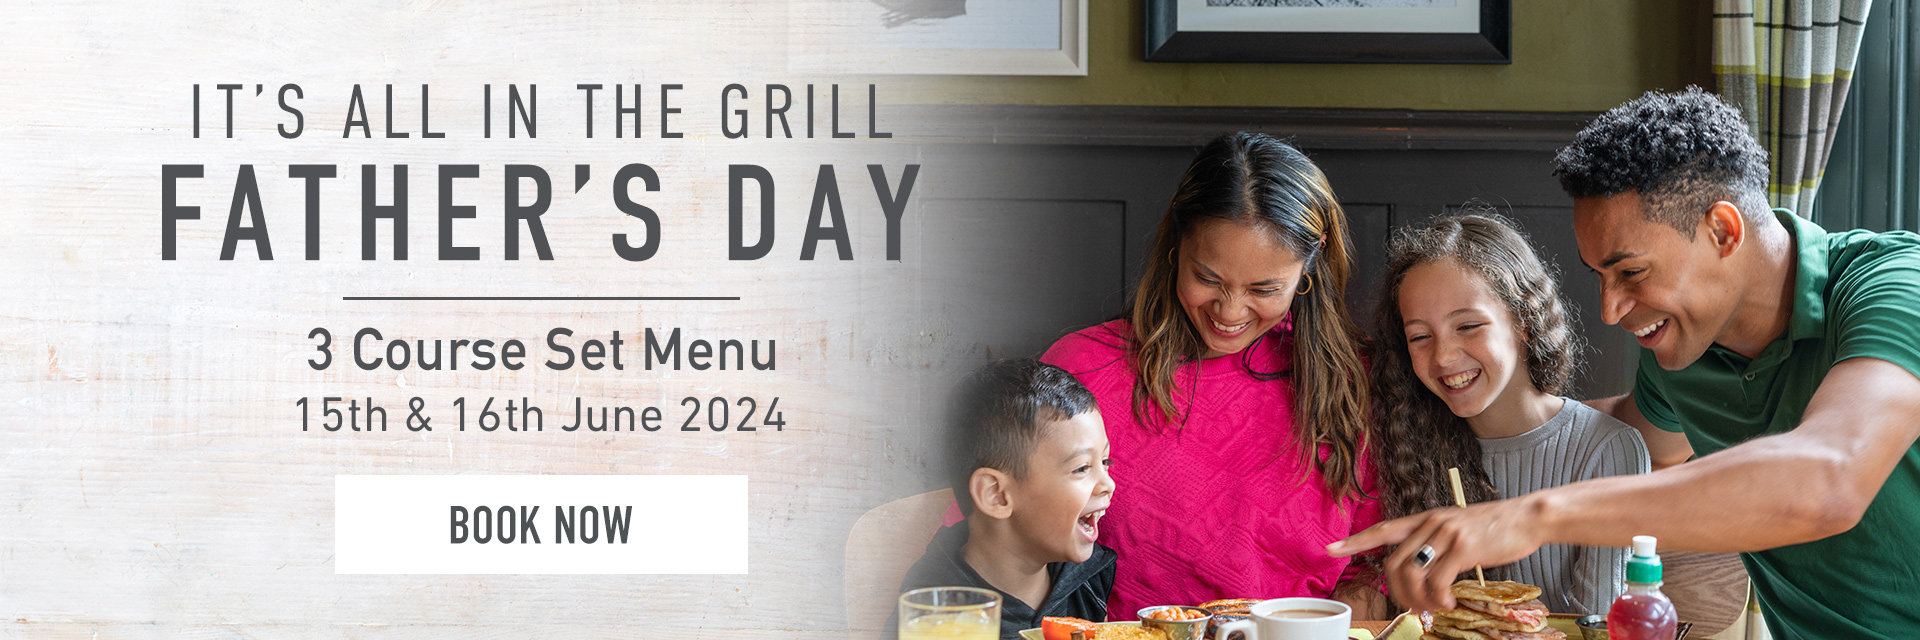 Father’s Day at Harvester Meridian Park